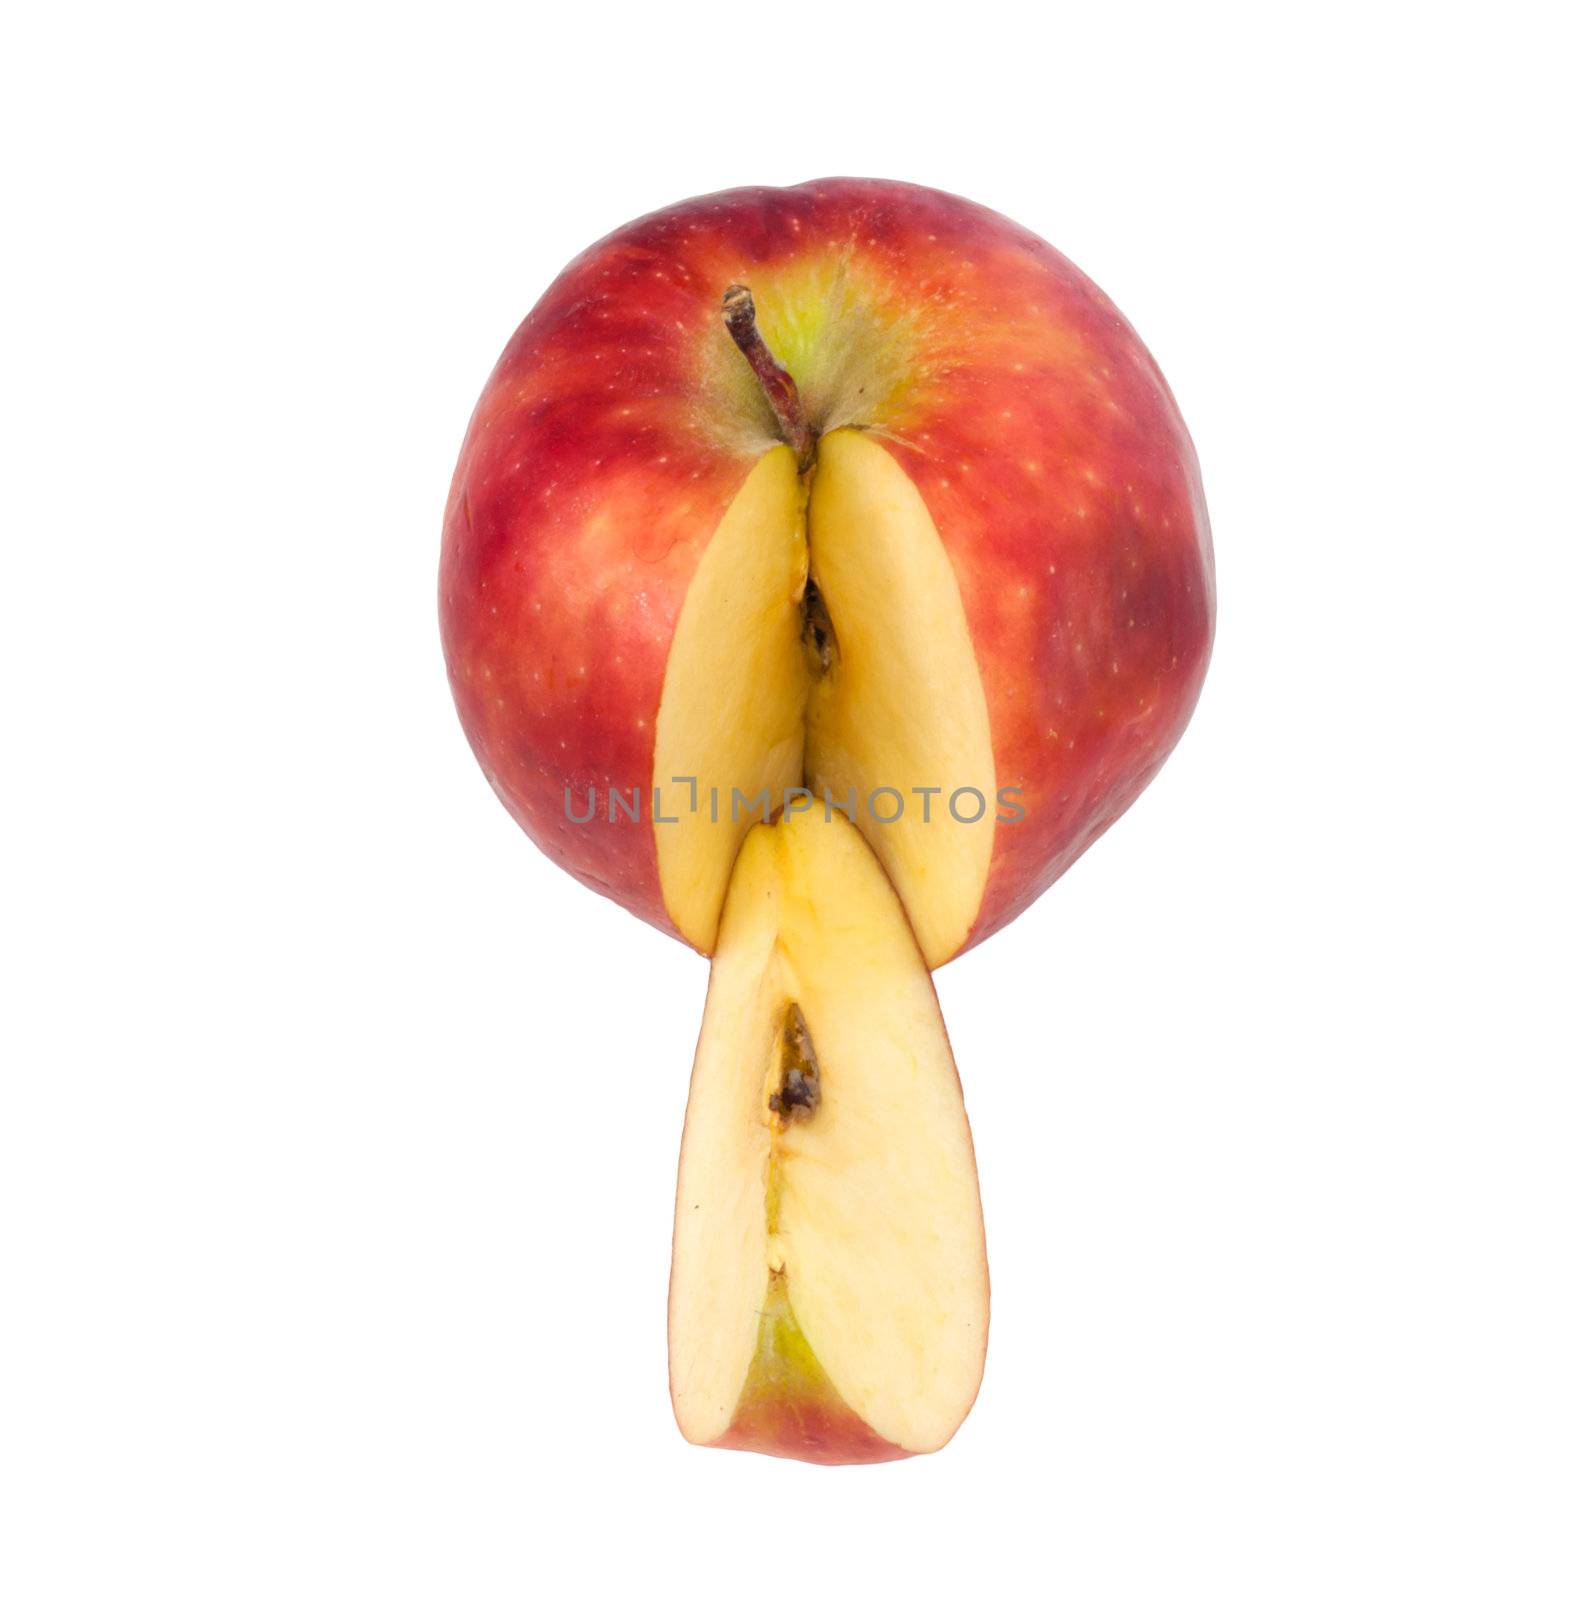 Red apple Isolated on white background.  by schankz